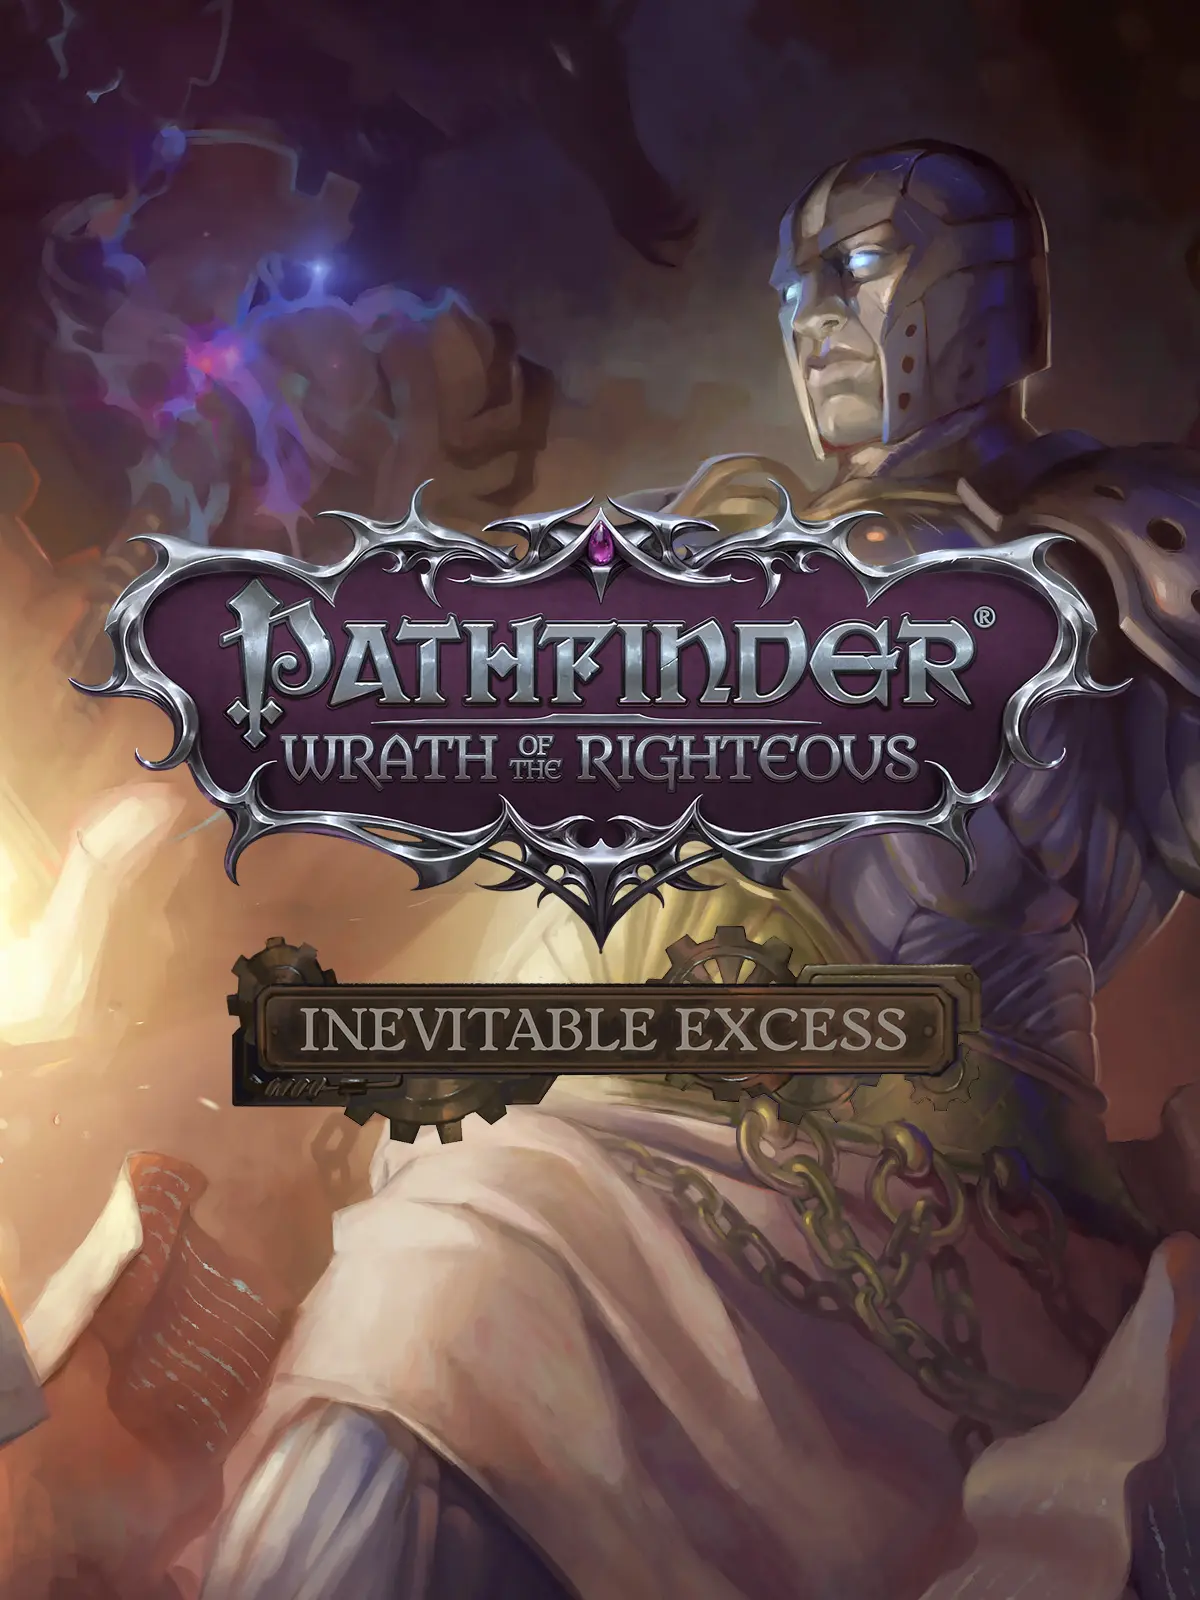 Pathfinder: Wrath of the Righteous - Inevitable Excess (PC / Mac) - Steam - Digital Code